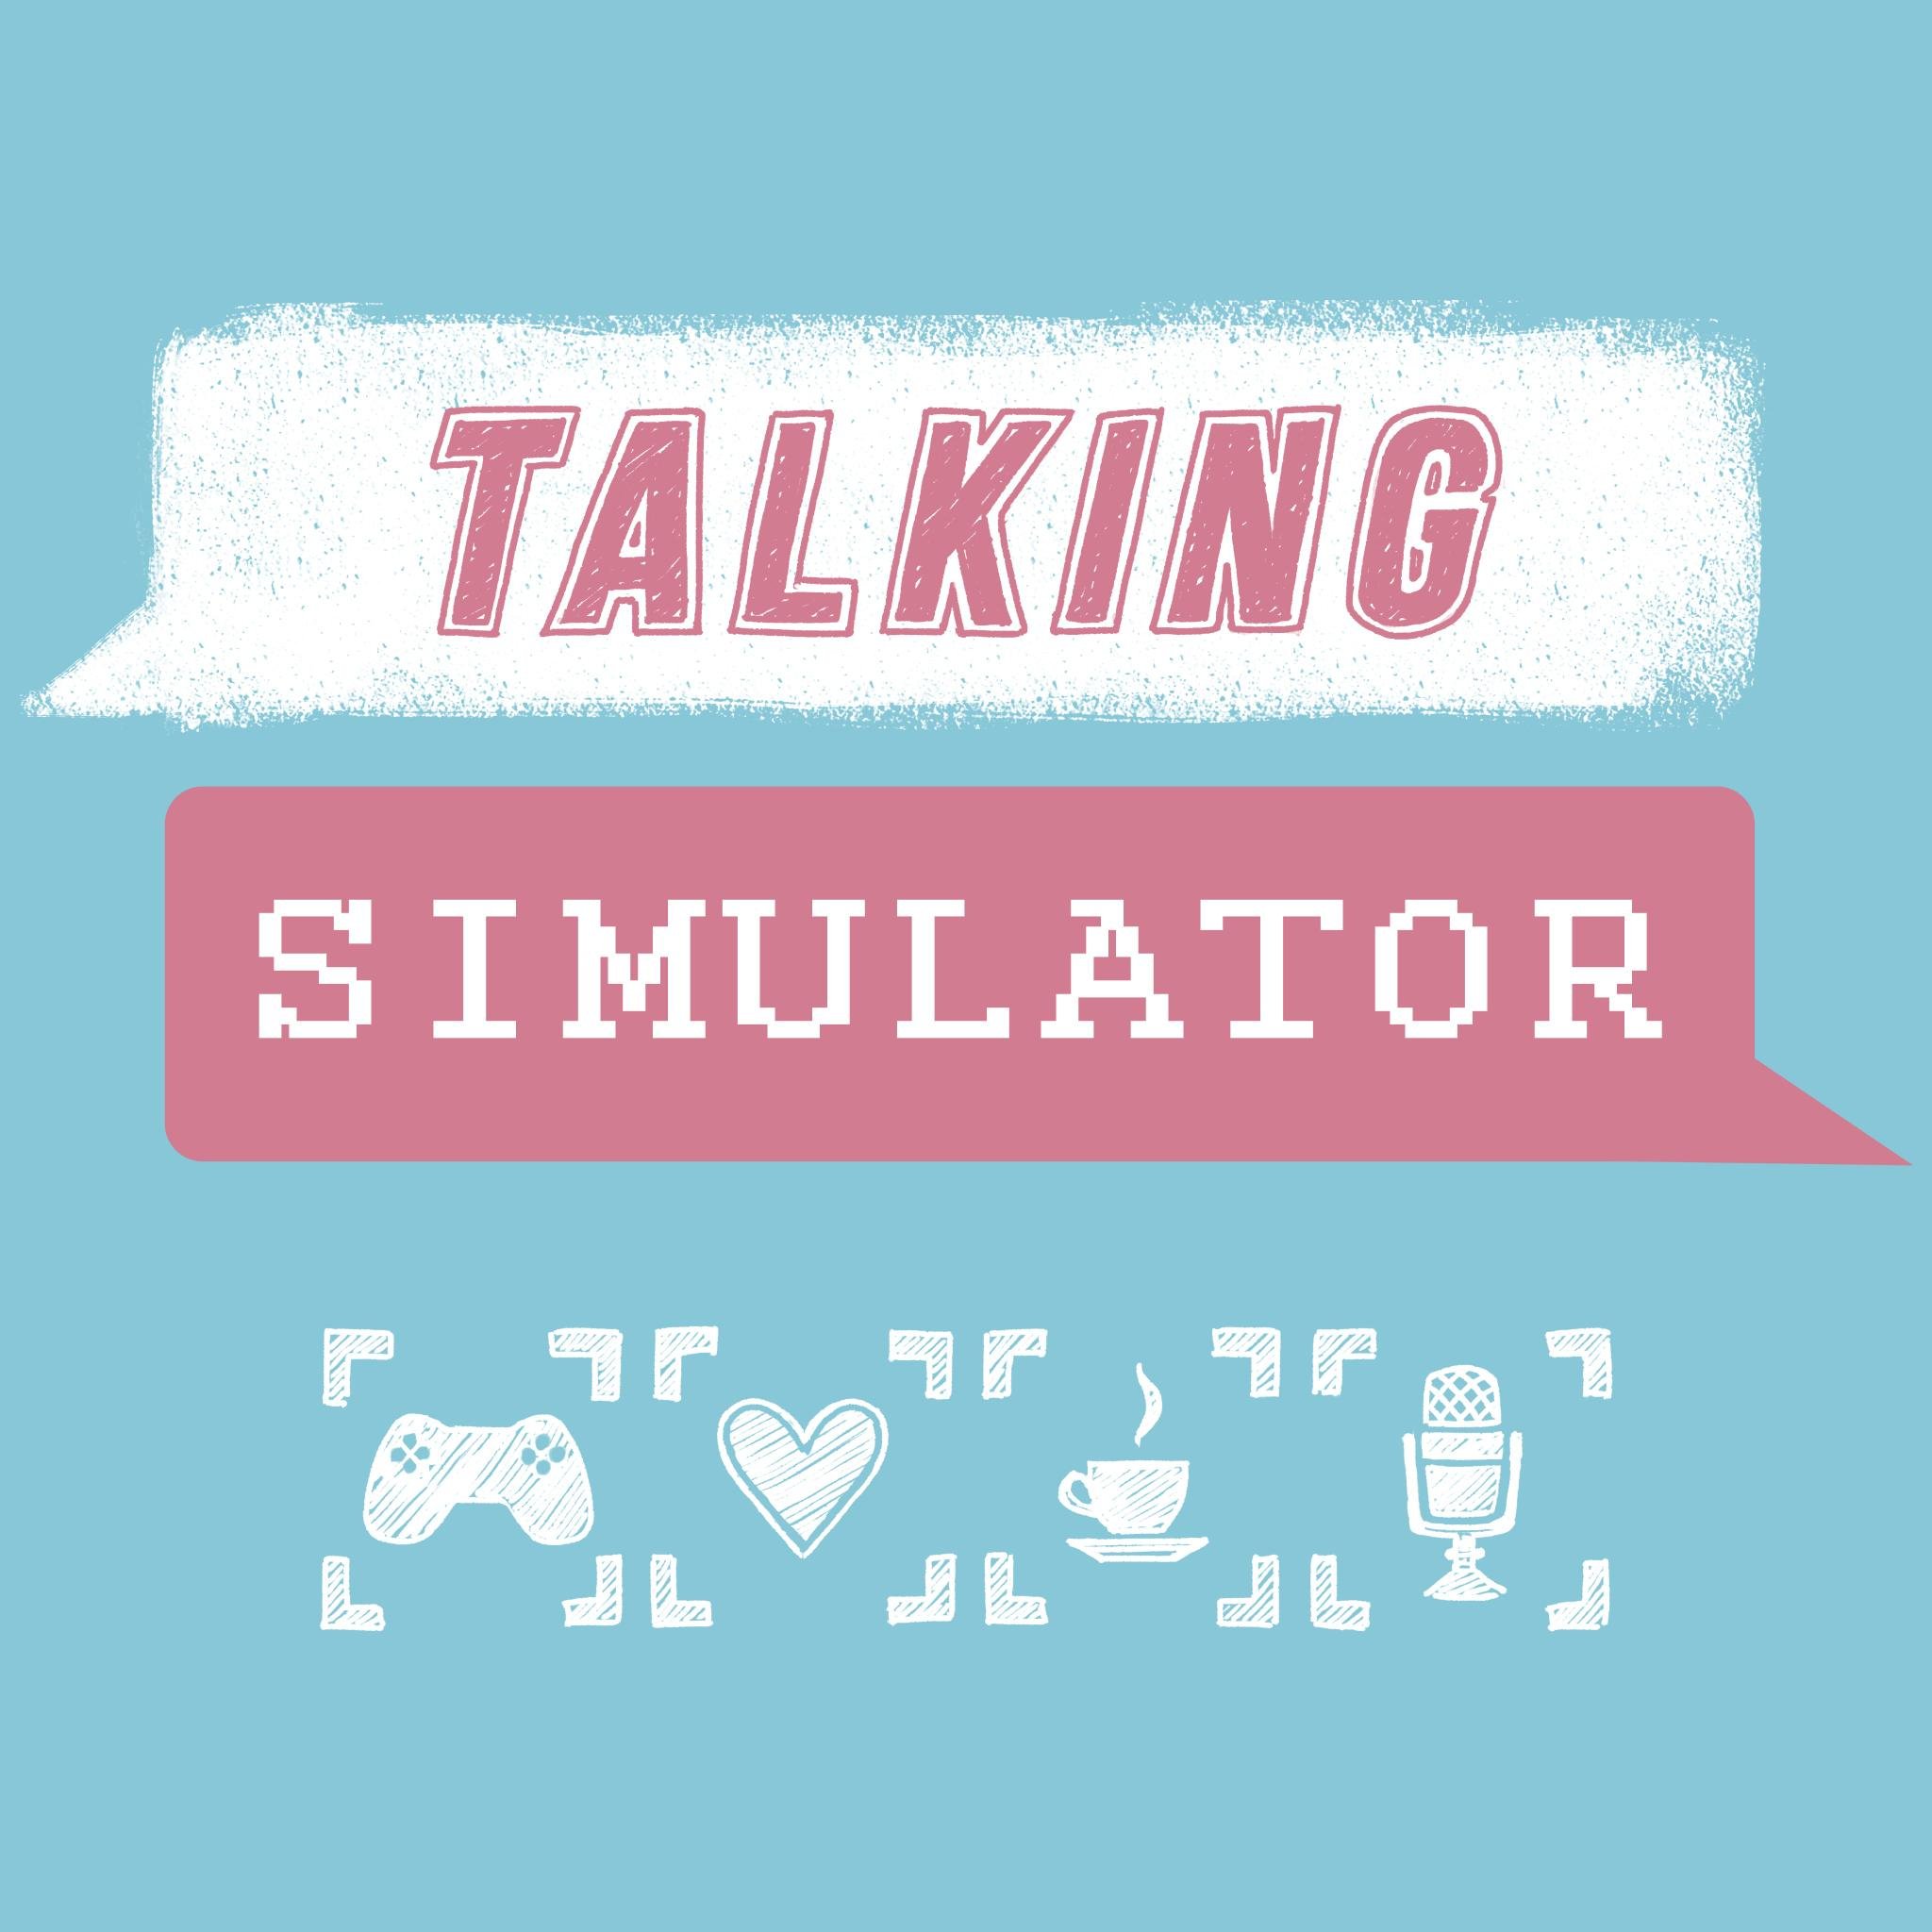 Short conversations about video games with interesting people who play them. Host: @jericawebber. Mixed by: @dancparkes. Music: @jazzmickle. Art: @emajarian.